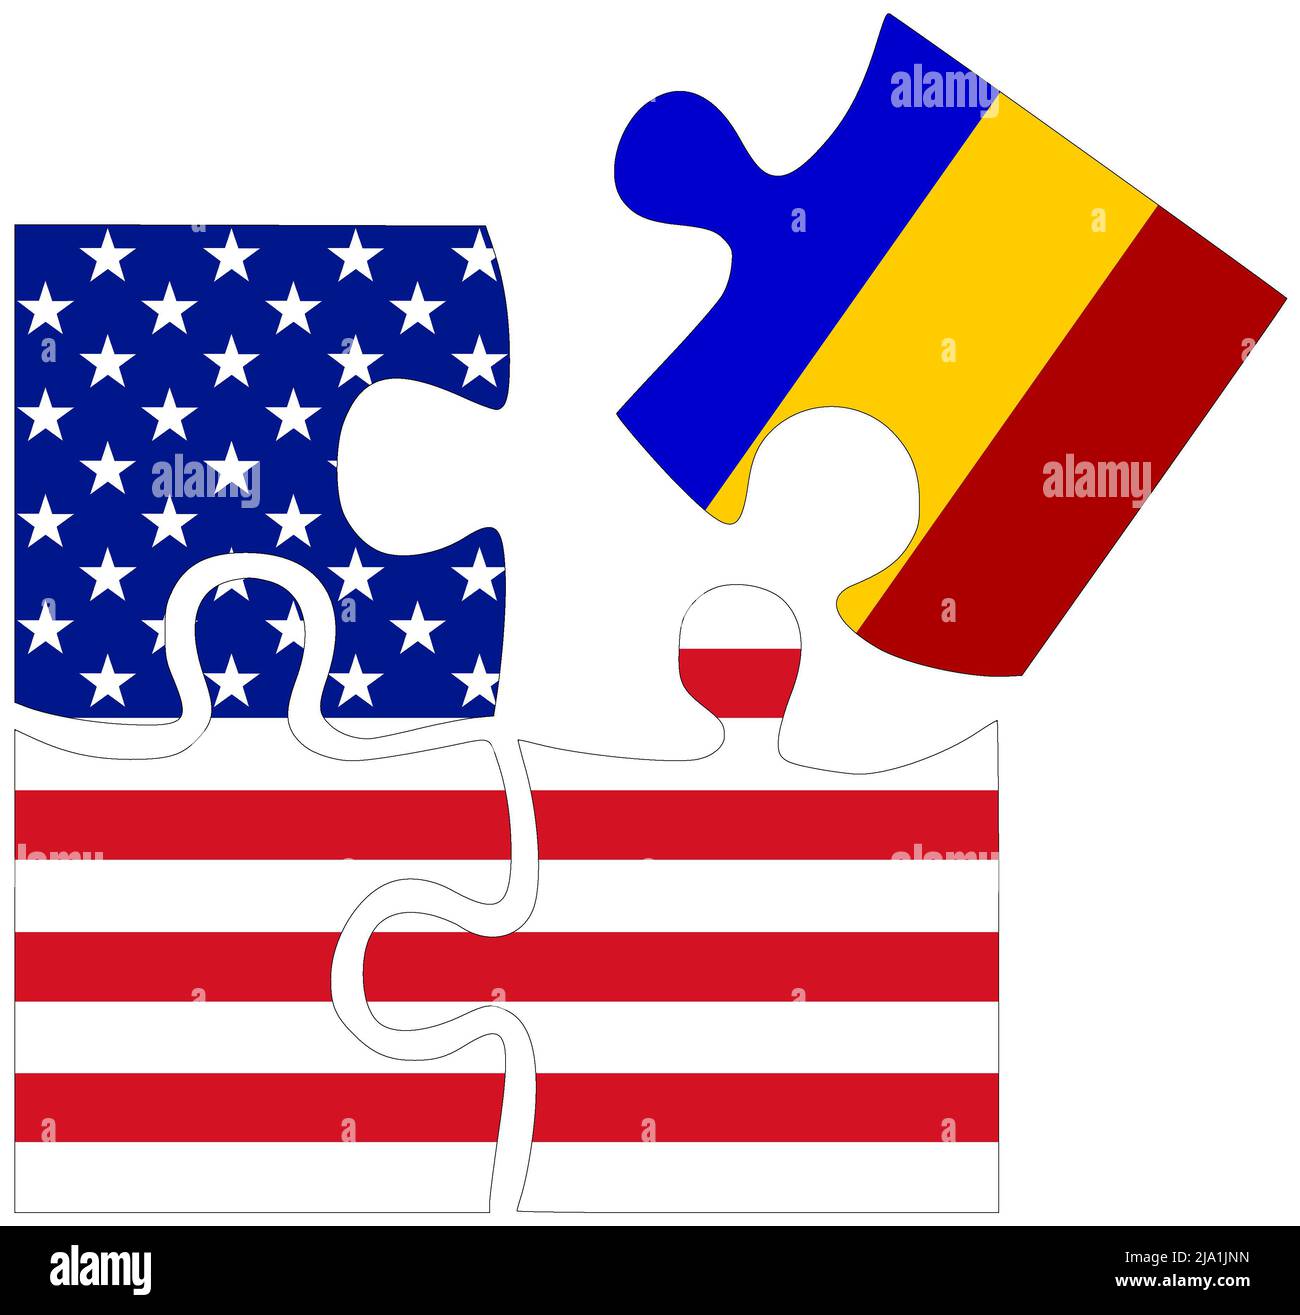 USA - Romania : puzzle shapes with flags, symbol of agreement or friendship Stock Photo